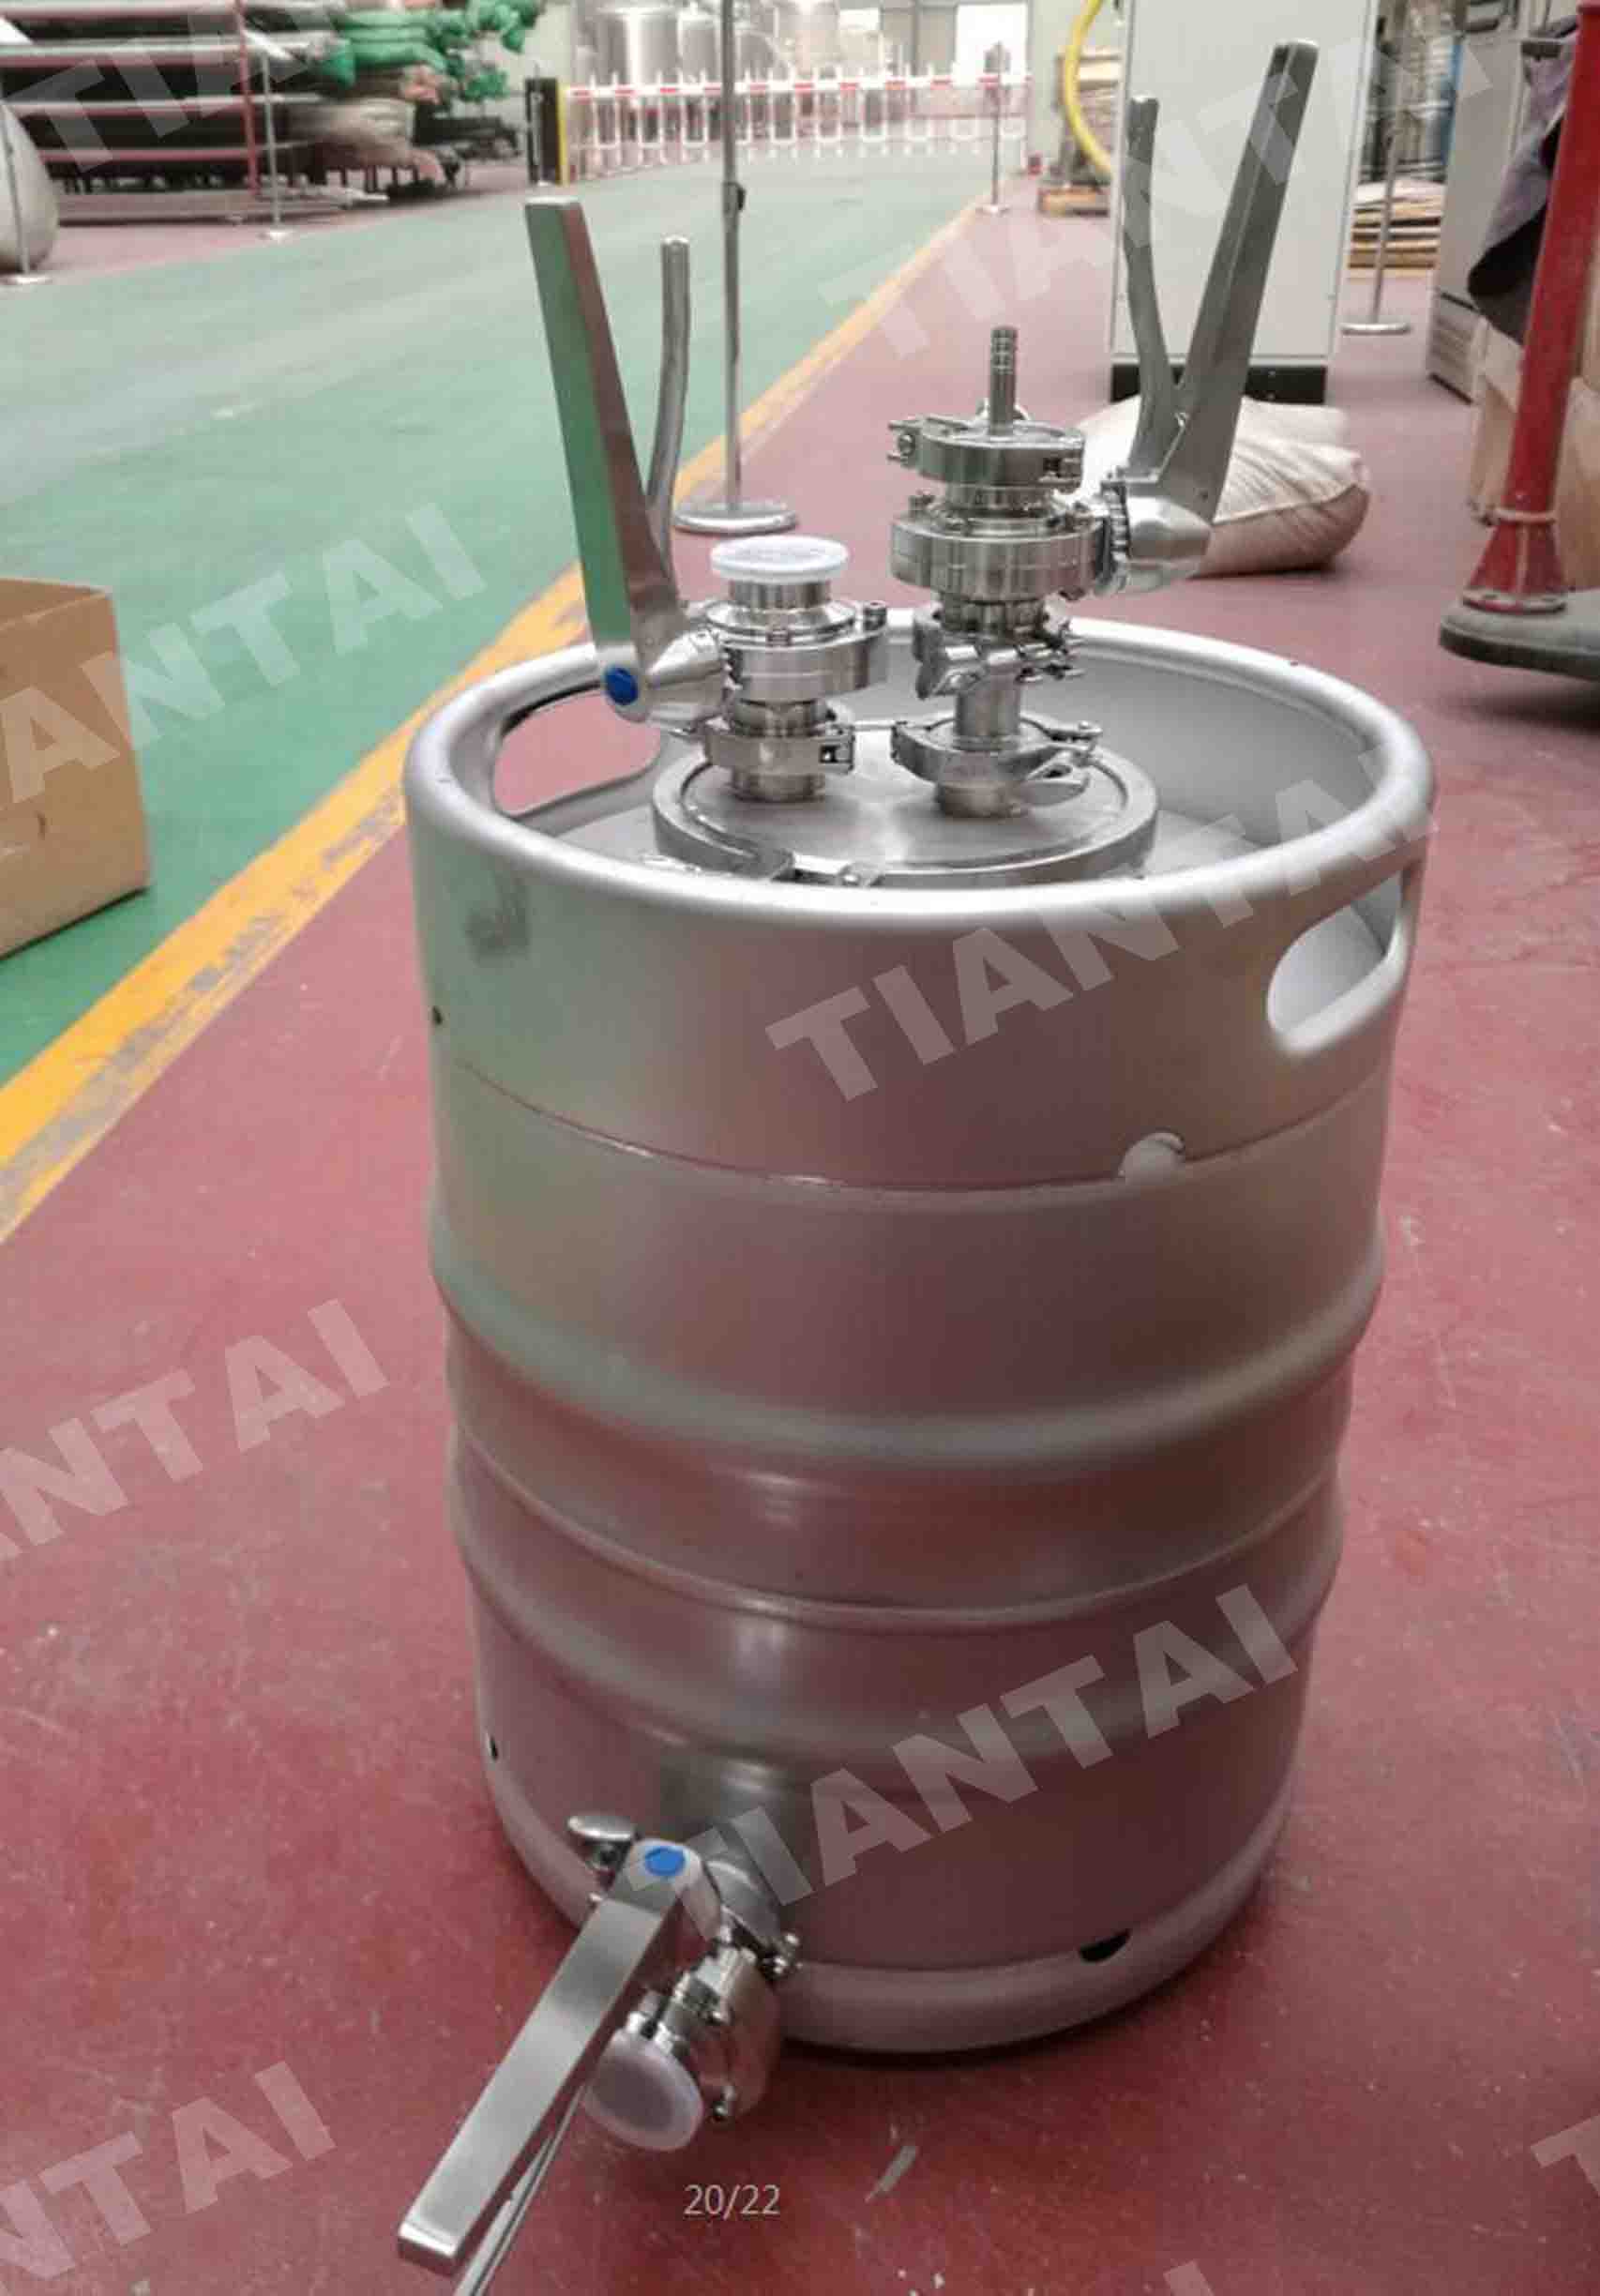 New design of the Yeast Feeder